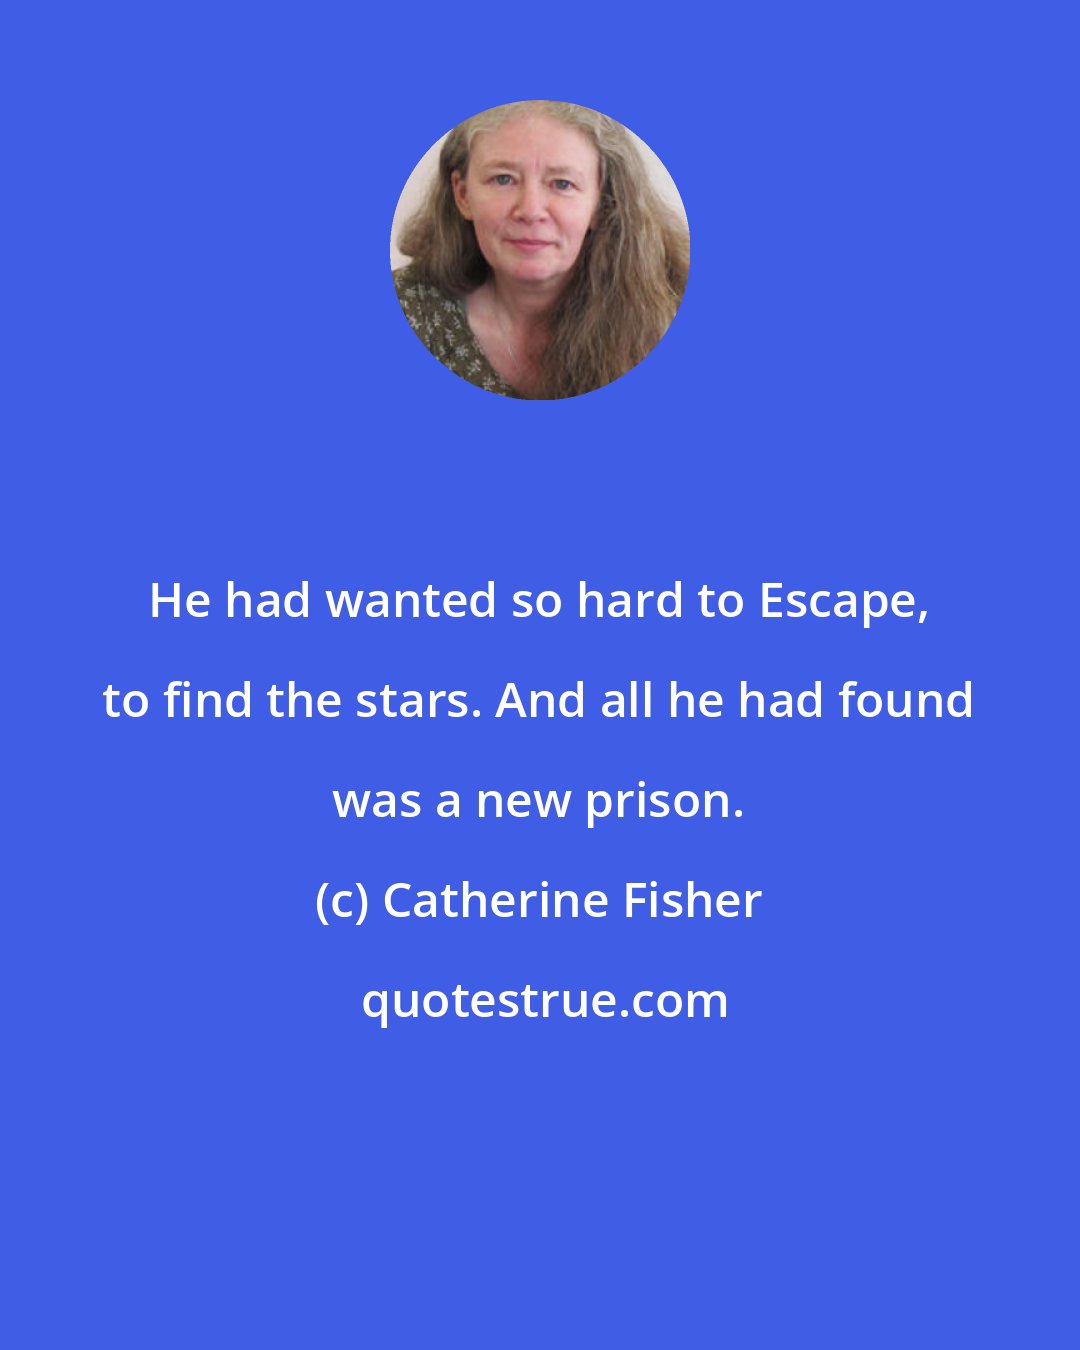 Catherine Fisher: He had wanted so hard to Escape, to find the stars. And all he had found was a new prison.